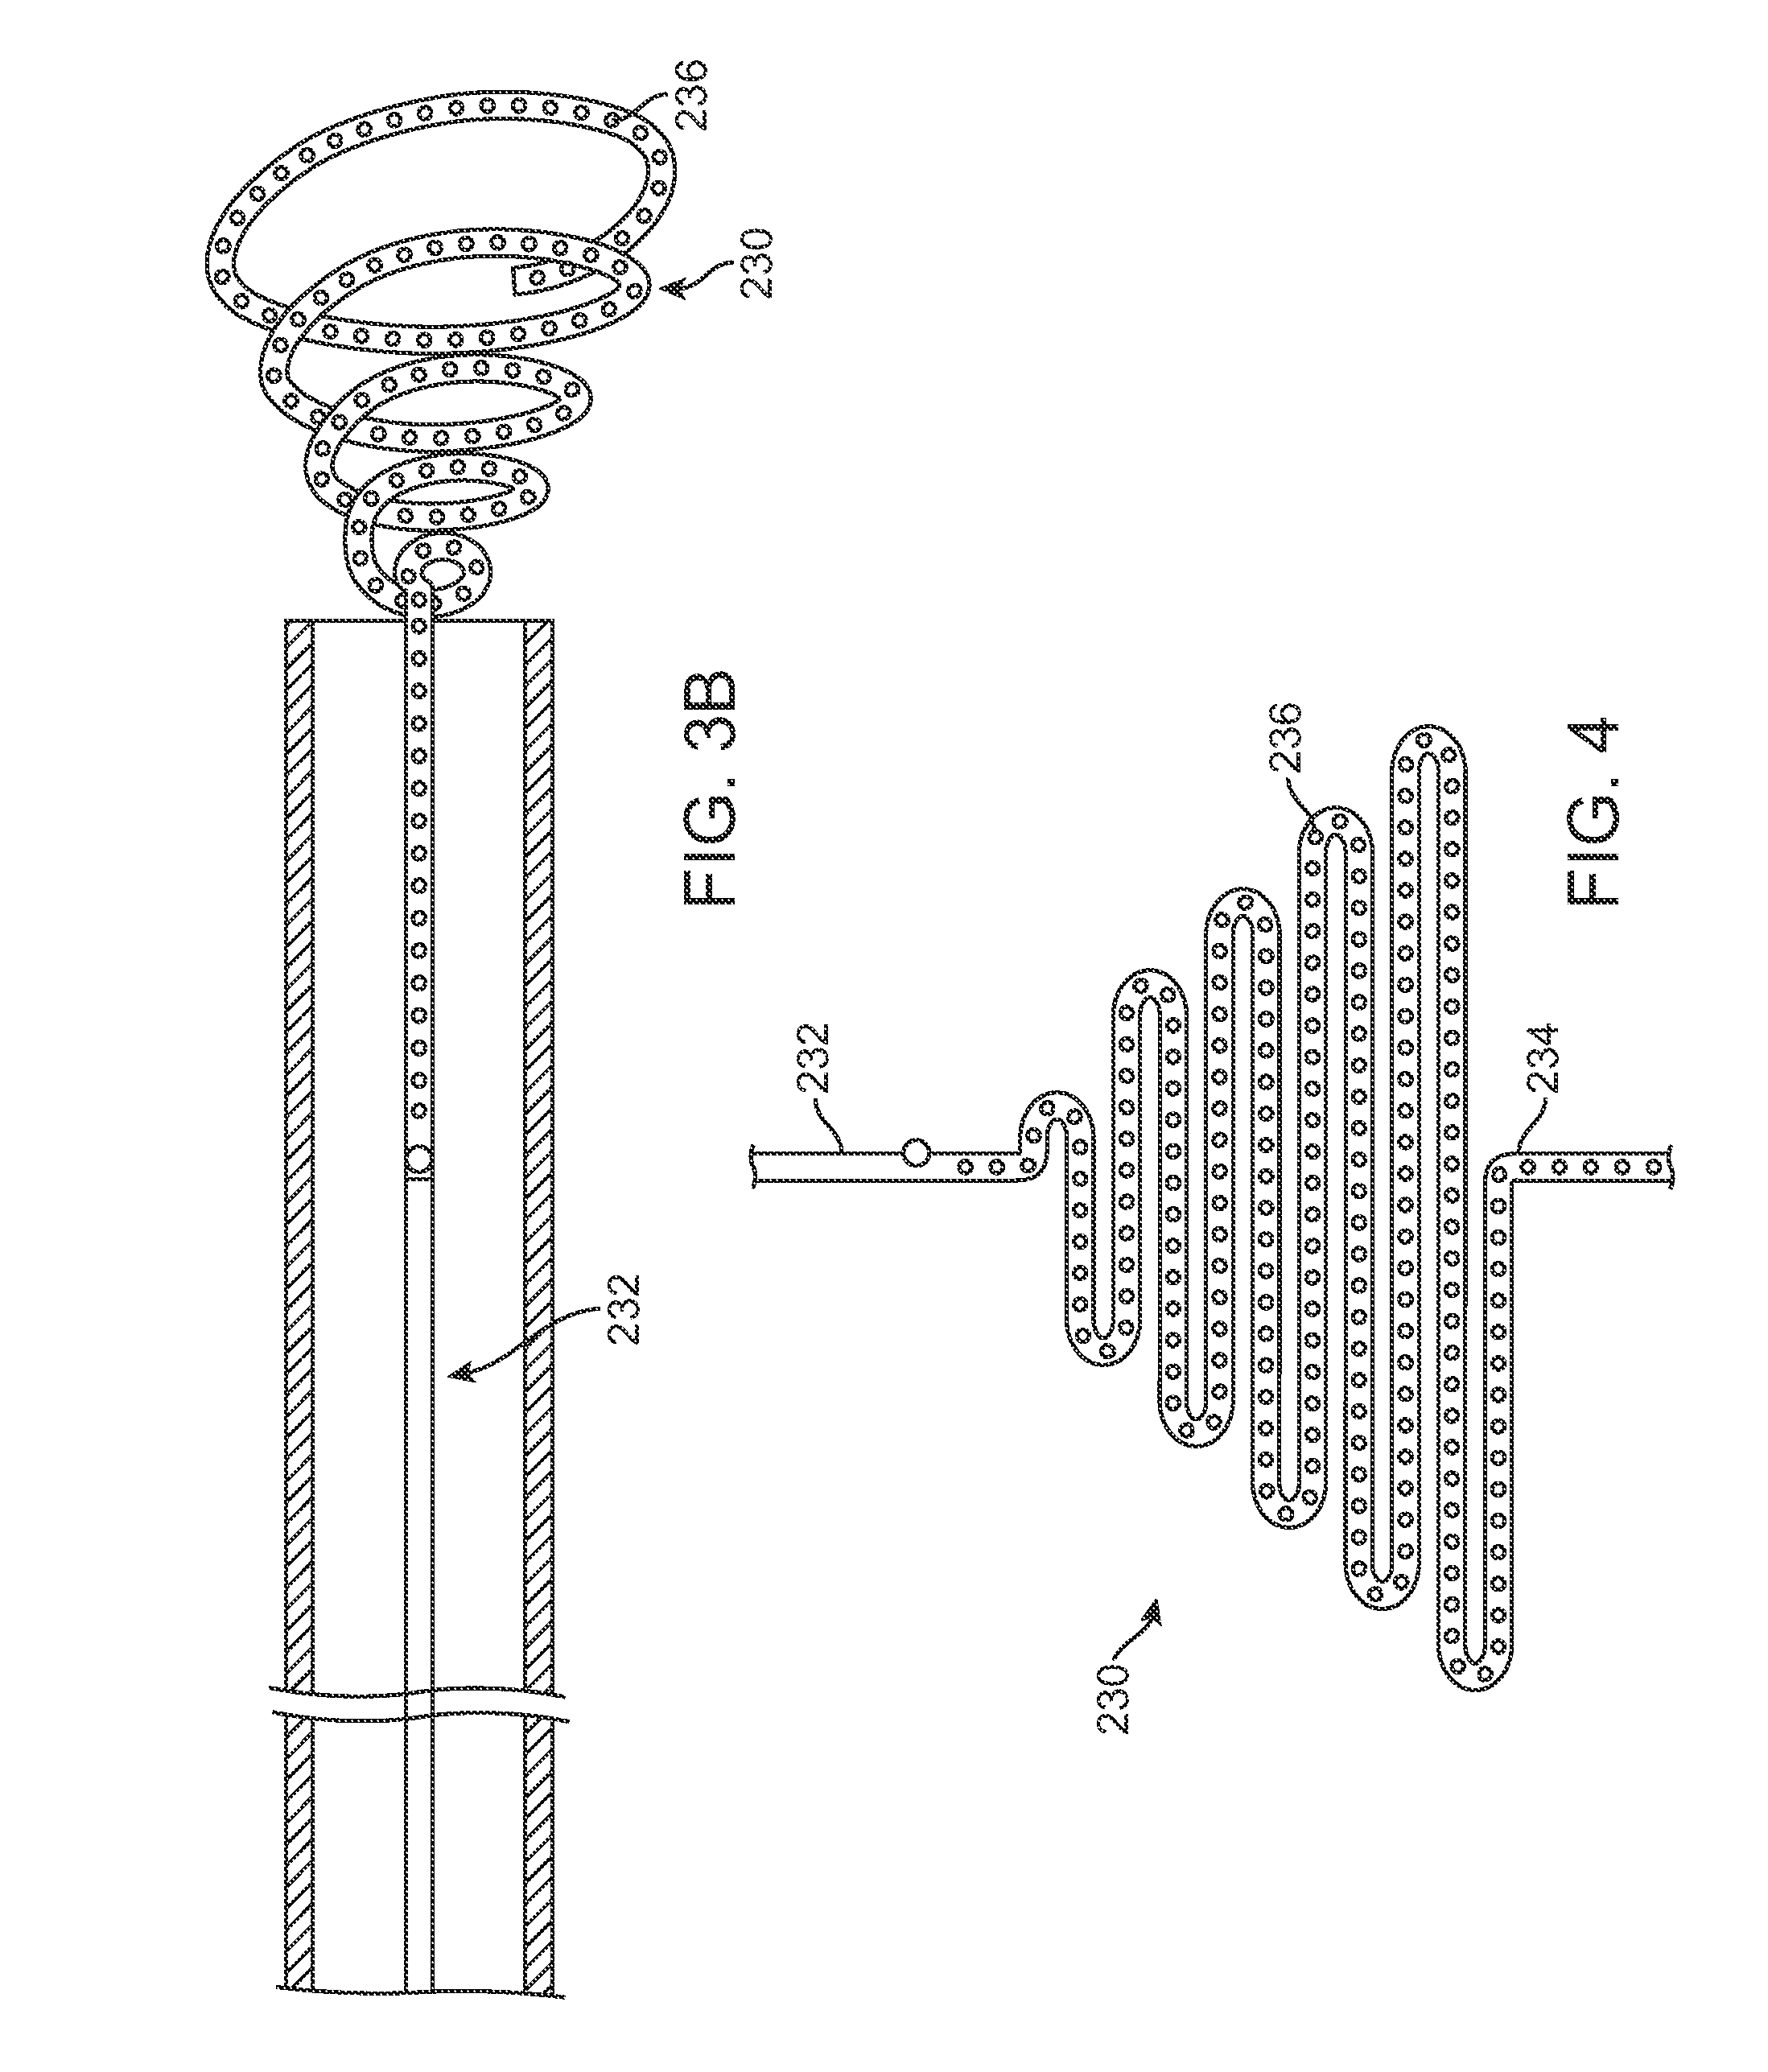 Indwelling Temporary IVC Filter System With Drug Delivery and Aspiration